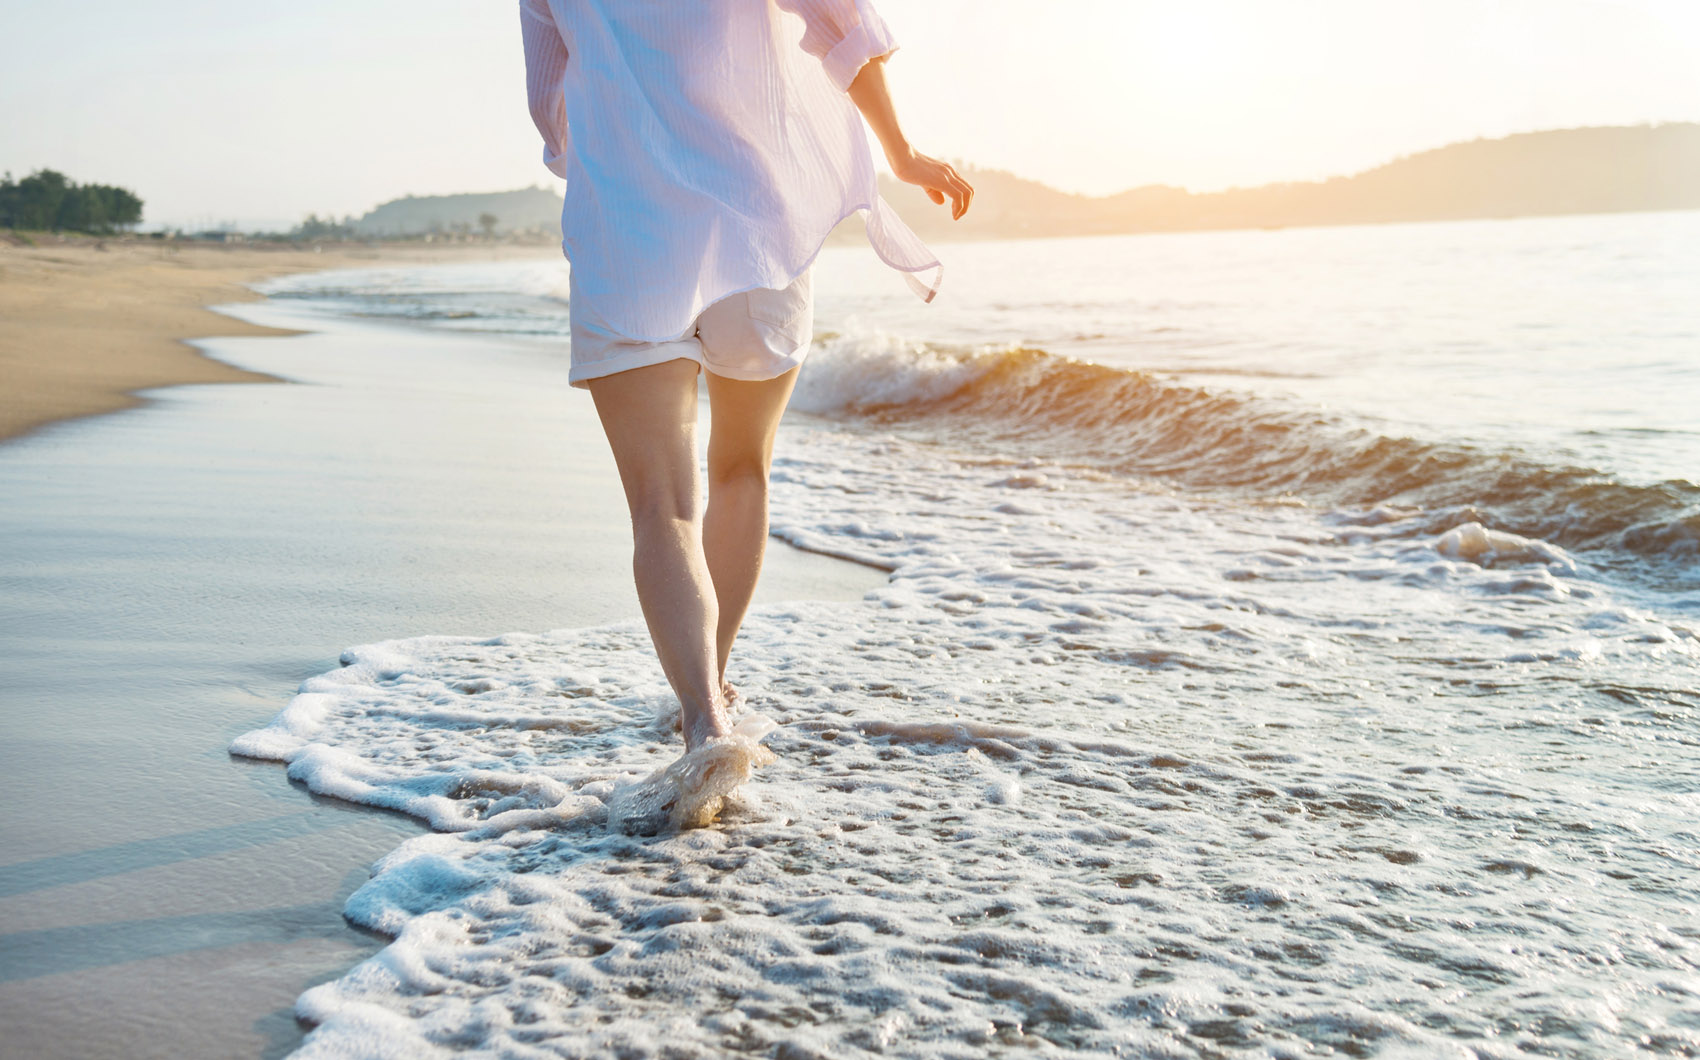 Walking on the beach: all the benefits of beach walking